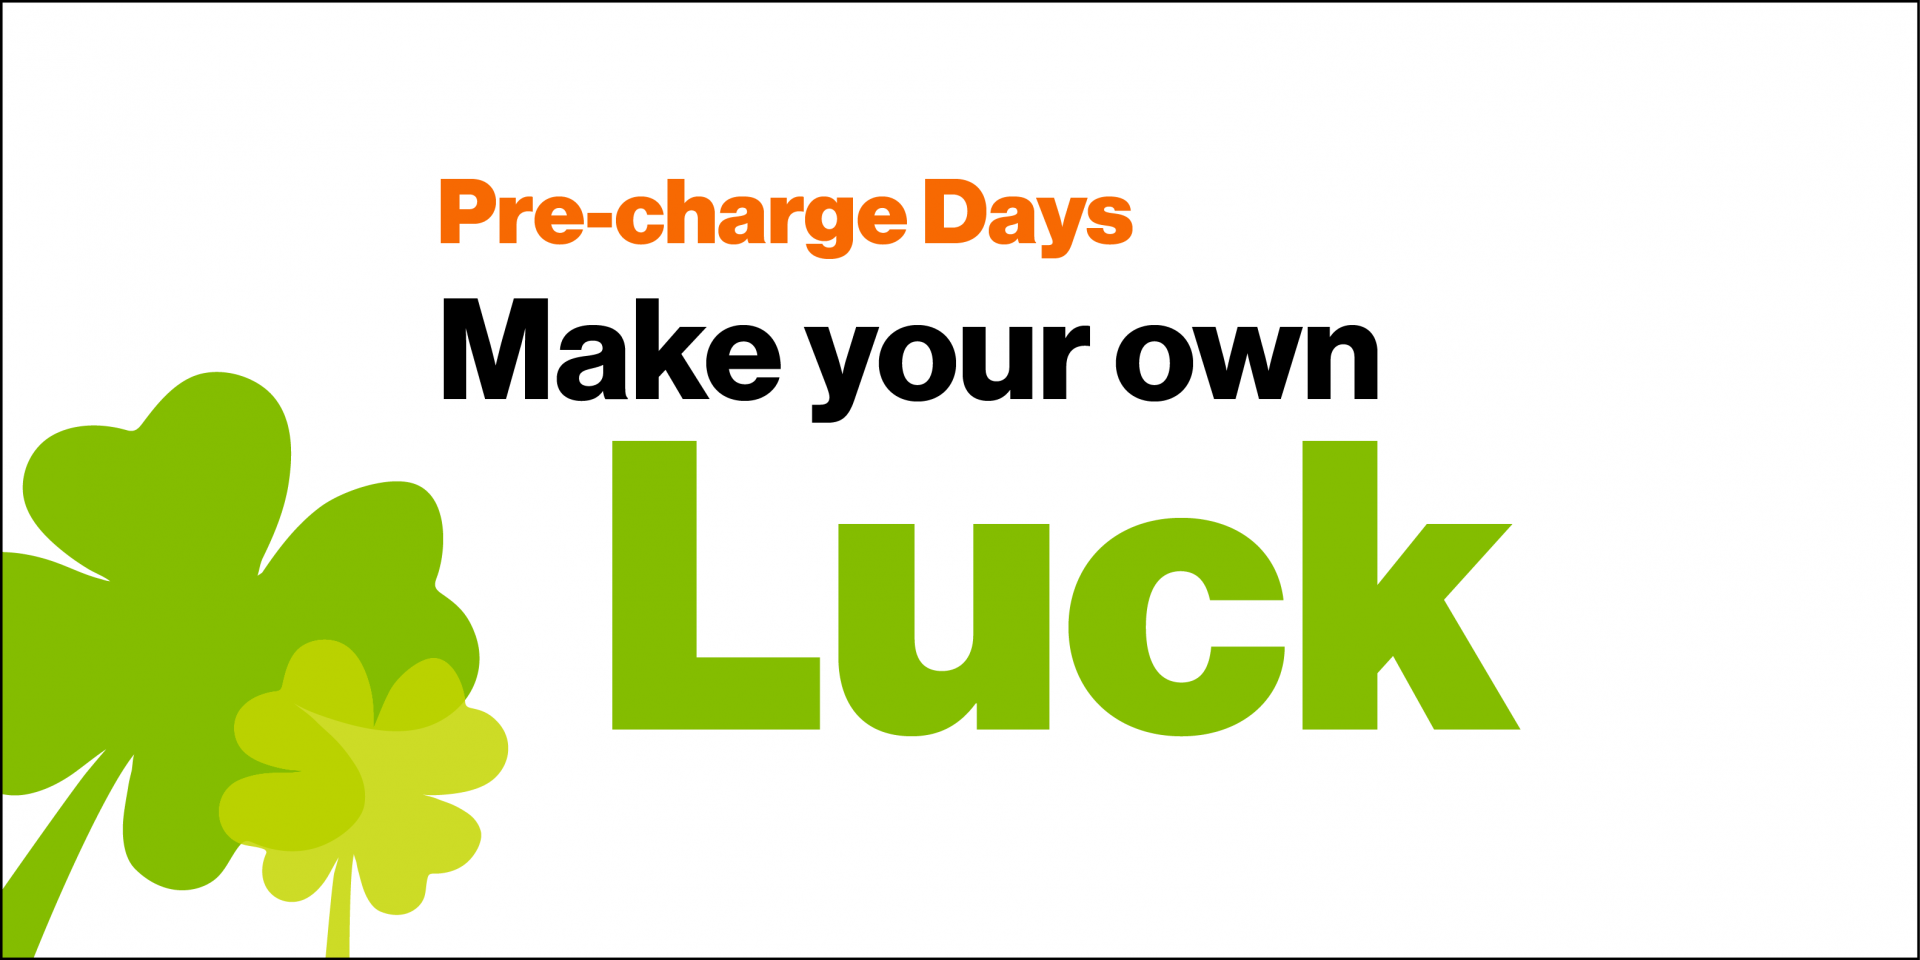 Image like say make your own luck with clover images